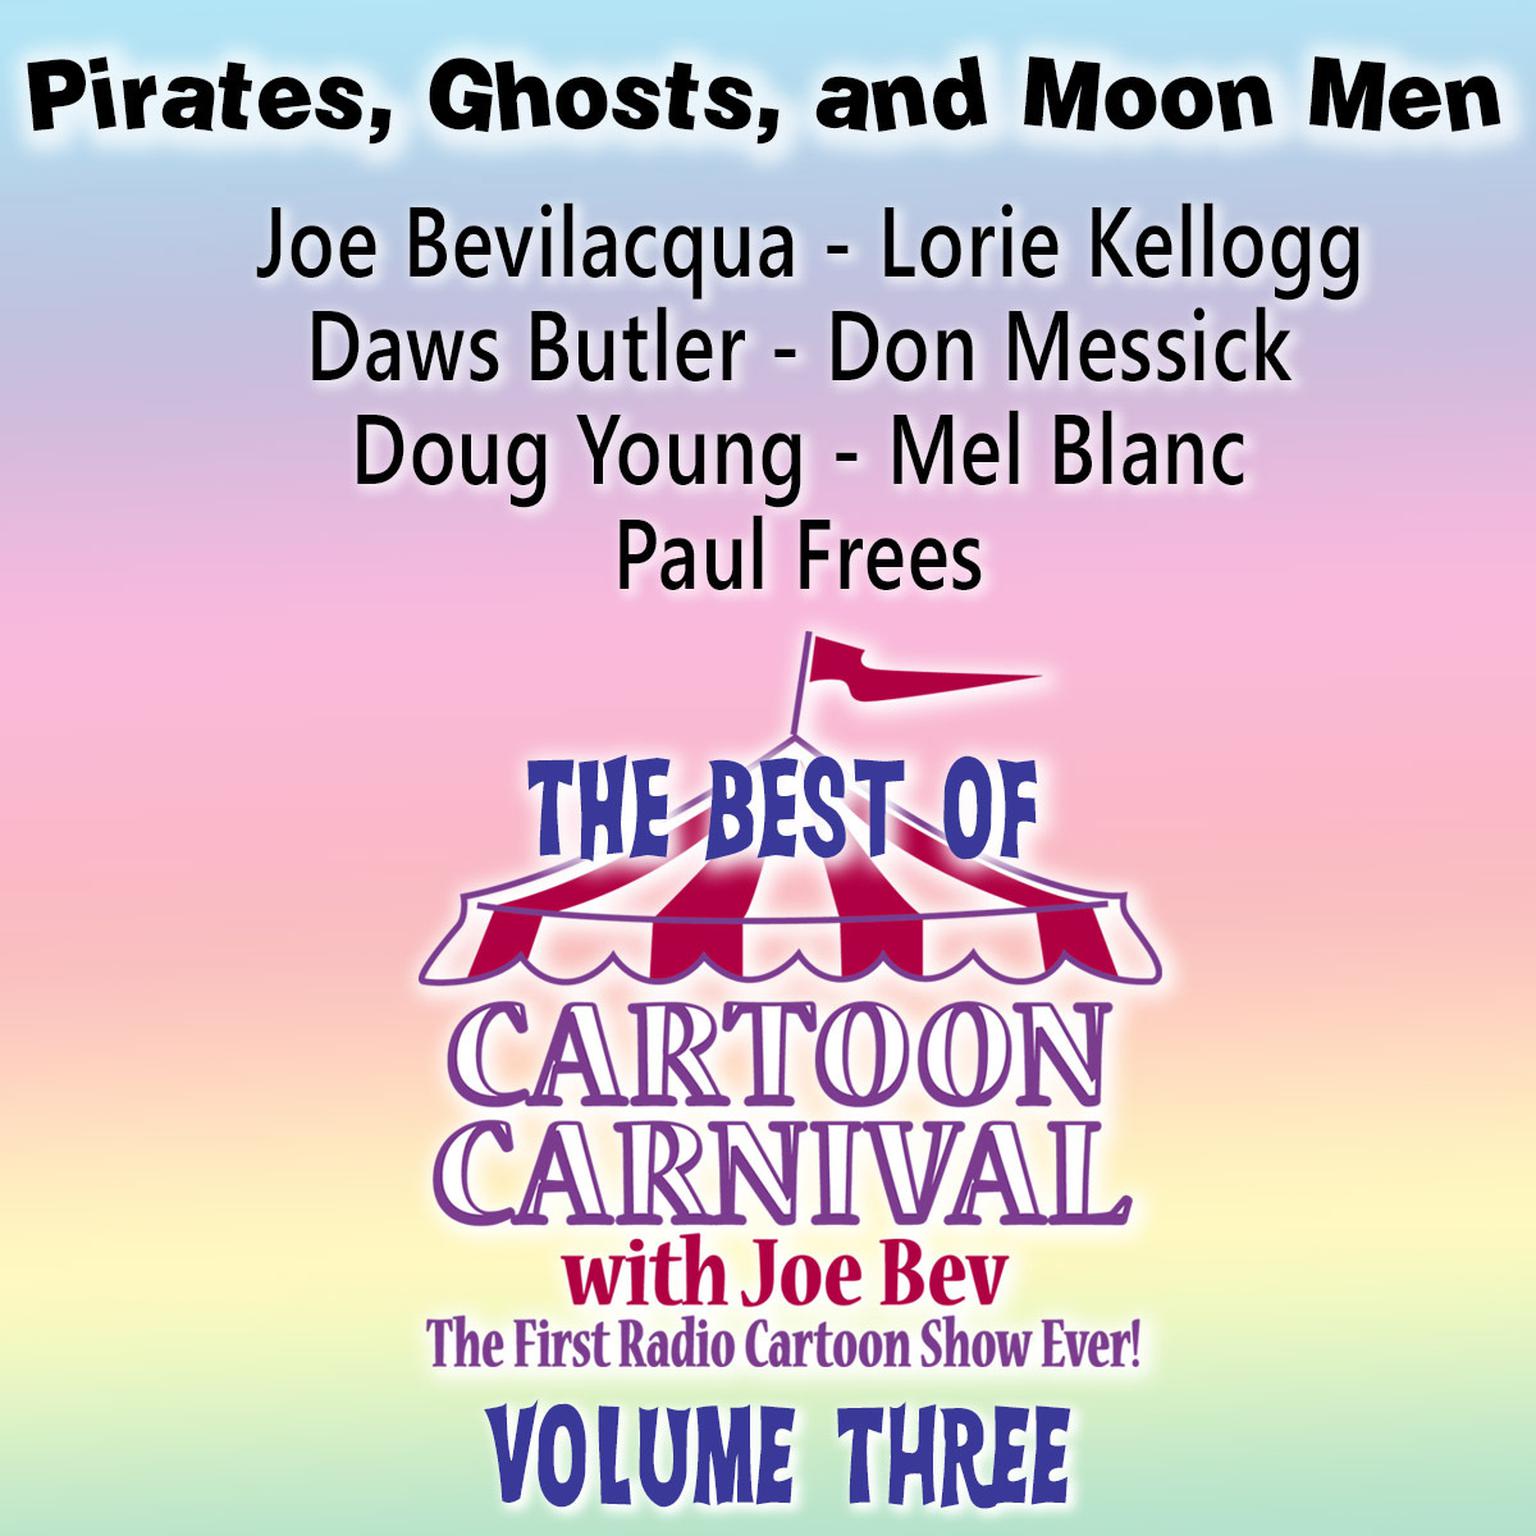 The Best of Cartoon Carnival, Vol. 3: Pirates, Ghosts, and Moon Men Audiobook, by Joe Bevilacqua